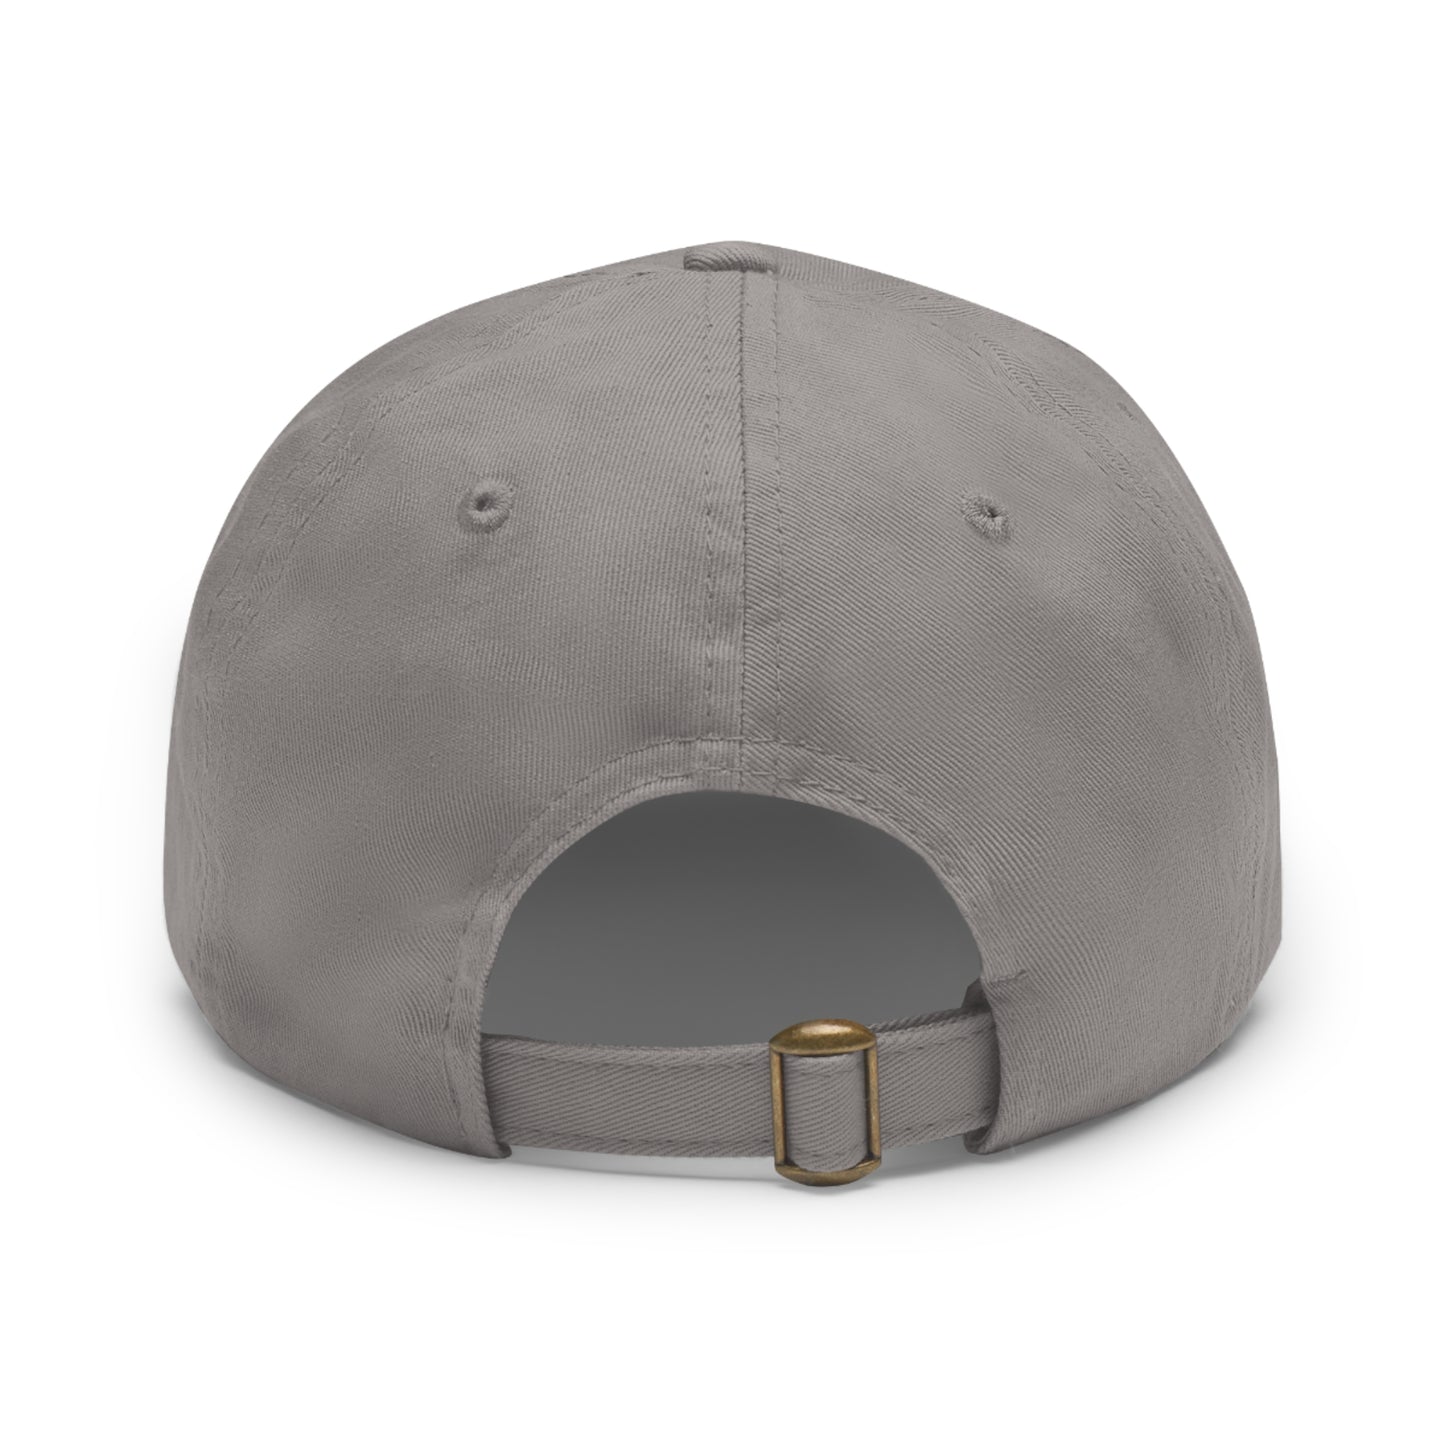 ABF Dad Hat with Leather Patch